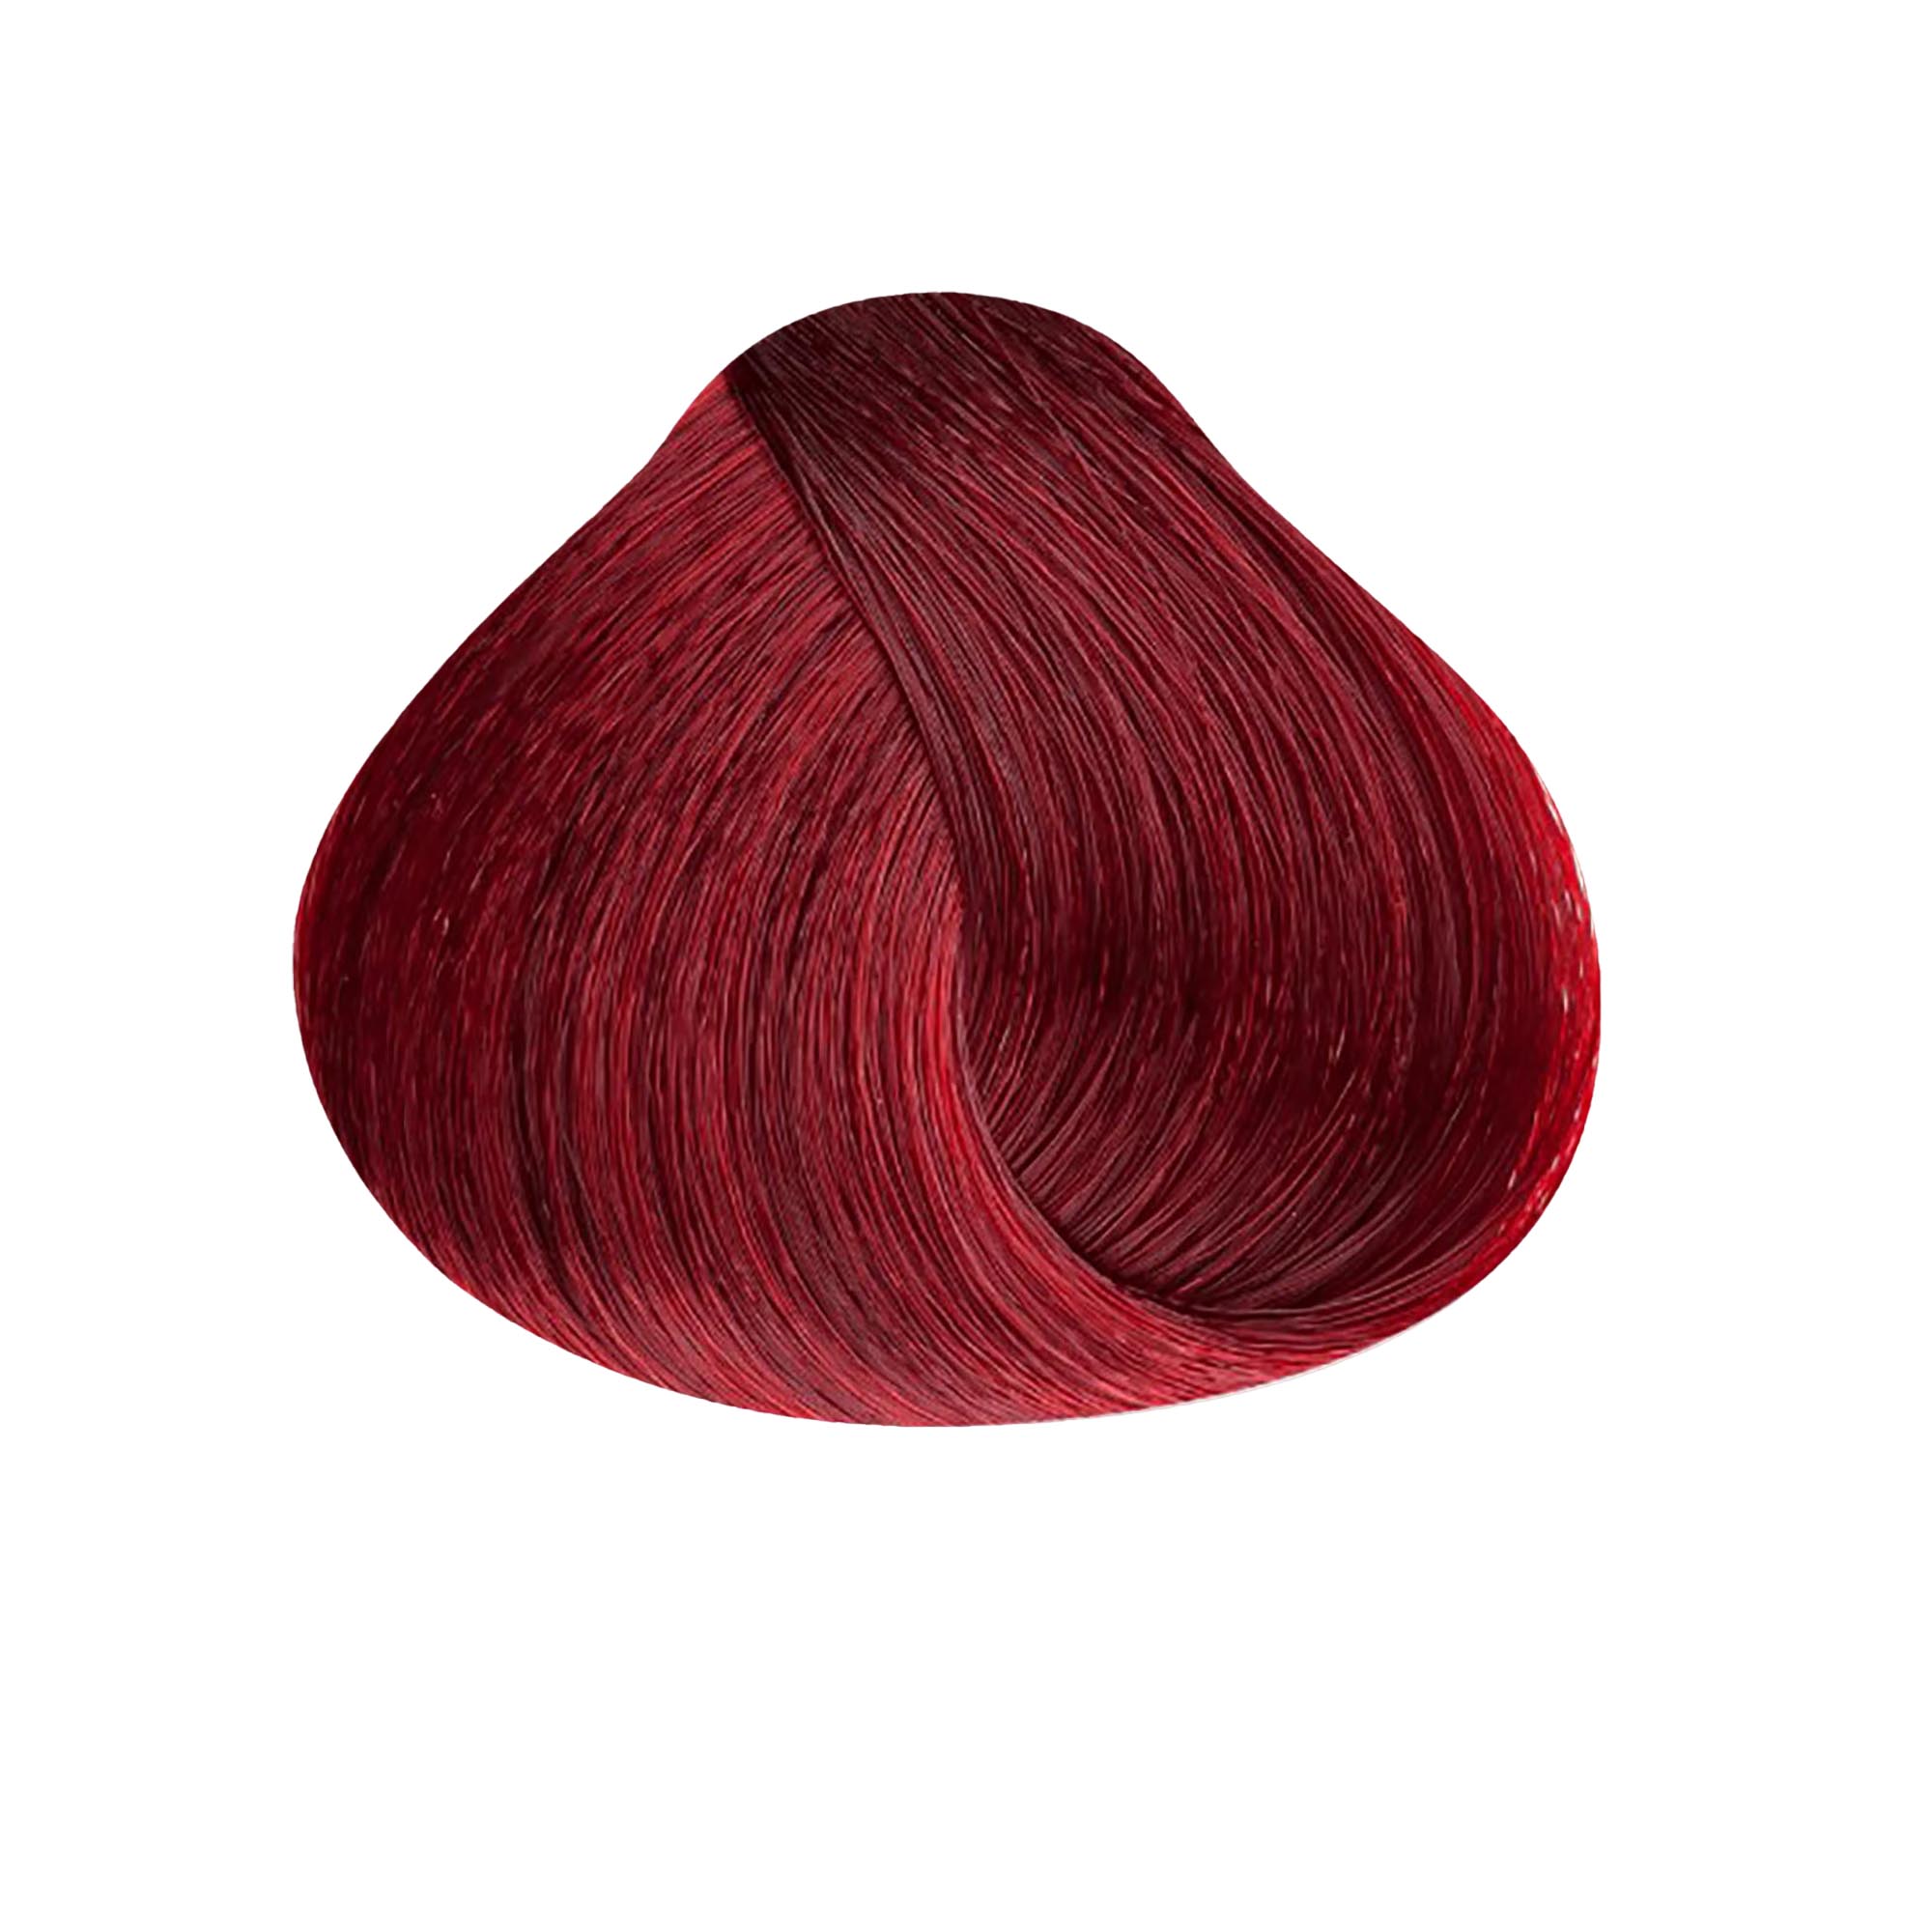 Satin Professional Hair Color / 7MR Red Mahogany Blonde / Swatch